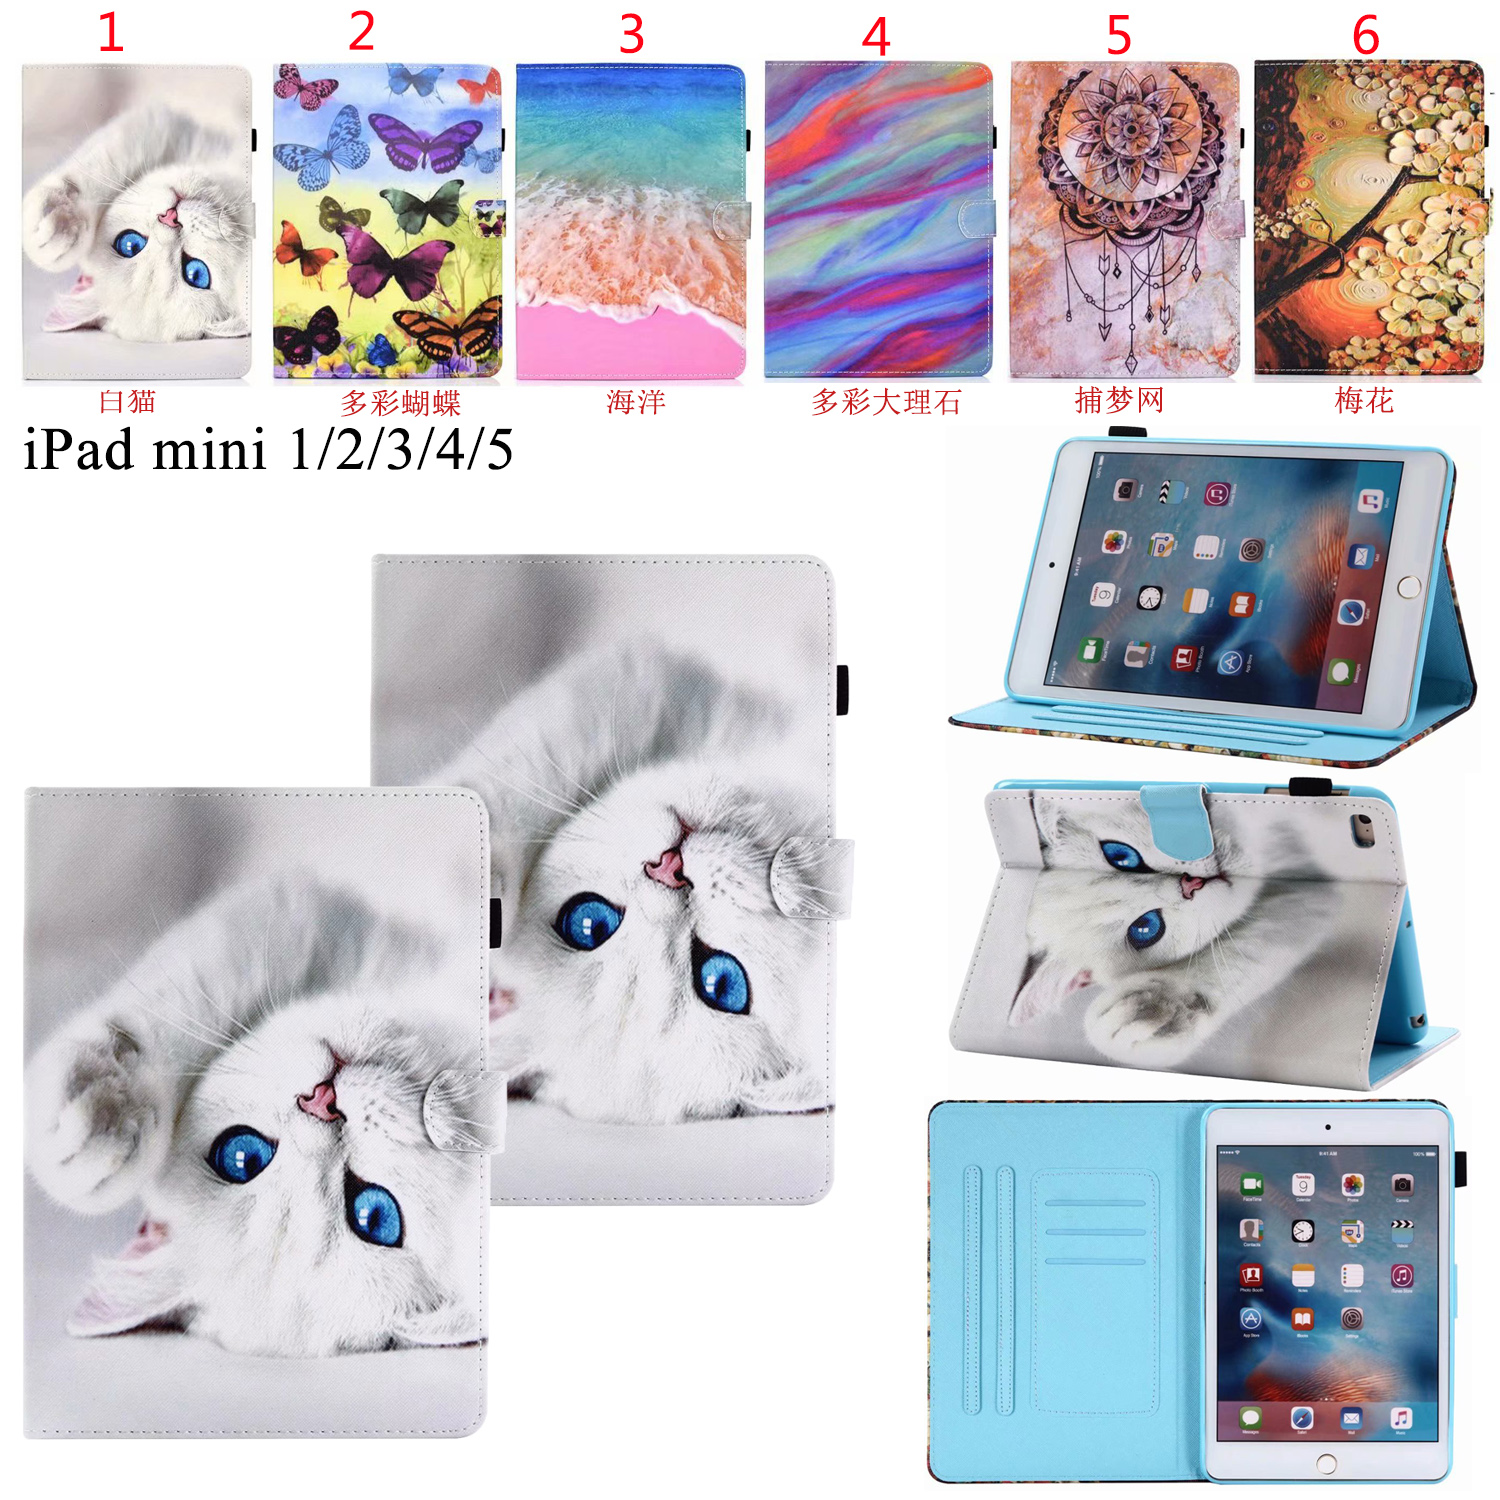 Casing Ipad Mini 1 Ipad Mini 2 Ipad Mini 3 Ipad Mini 4 Ipad Mini 5 White Cat Butterfly Plum Tablet Pc Case Shopee Malaysia